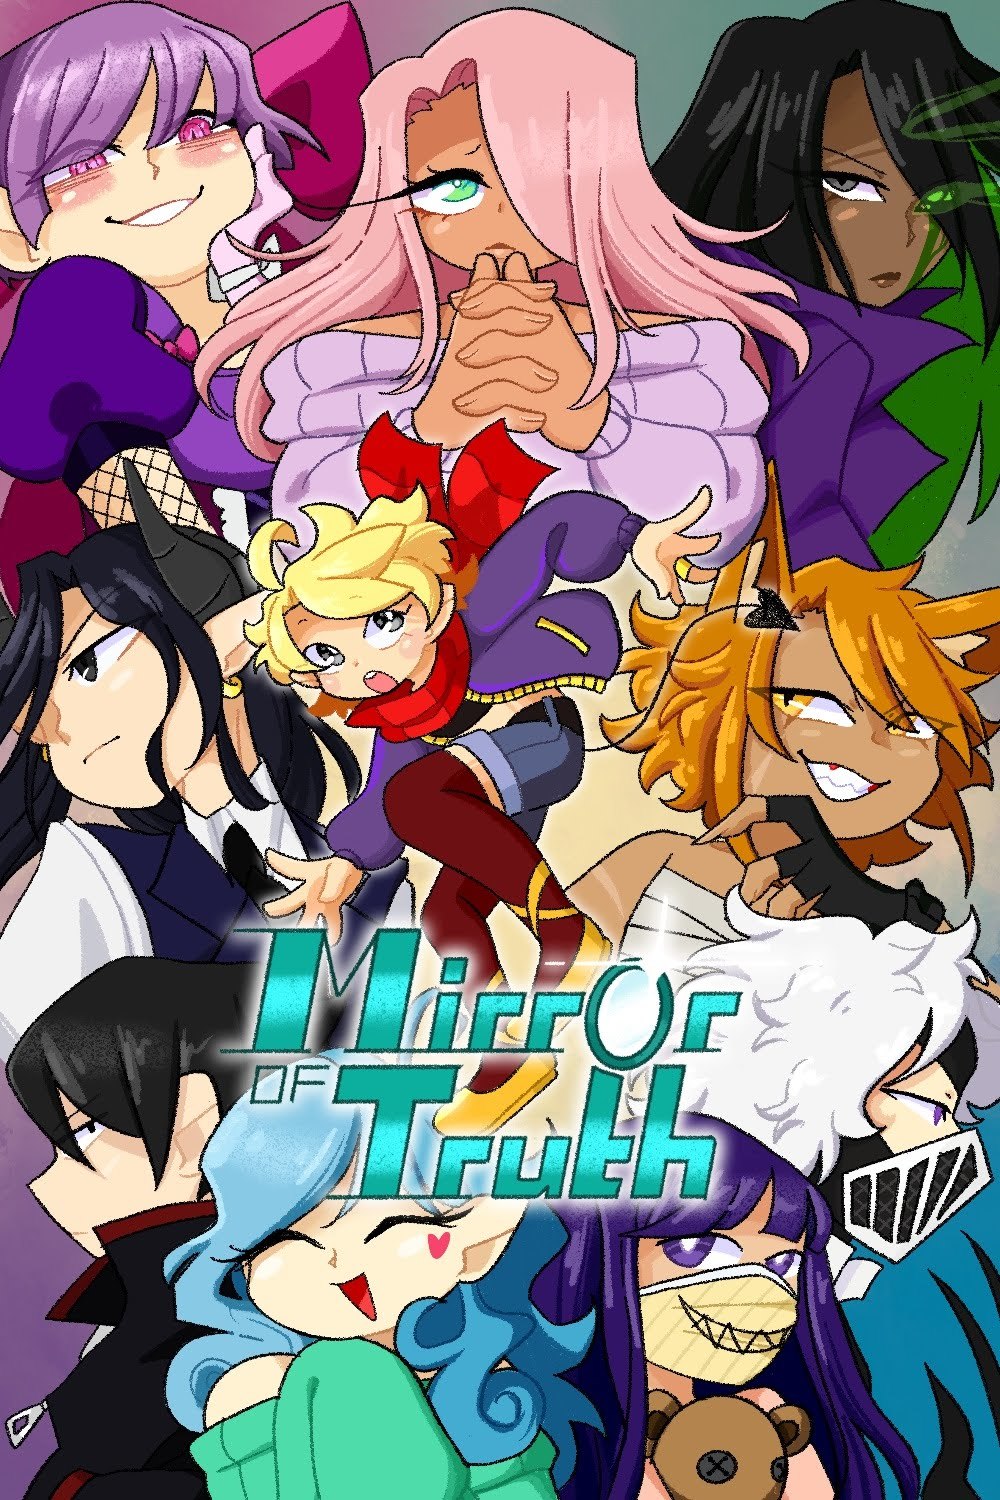 Cover art mockup of original game project, Mirror of Truth.